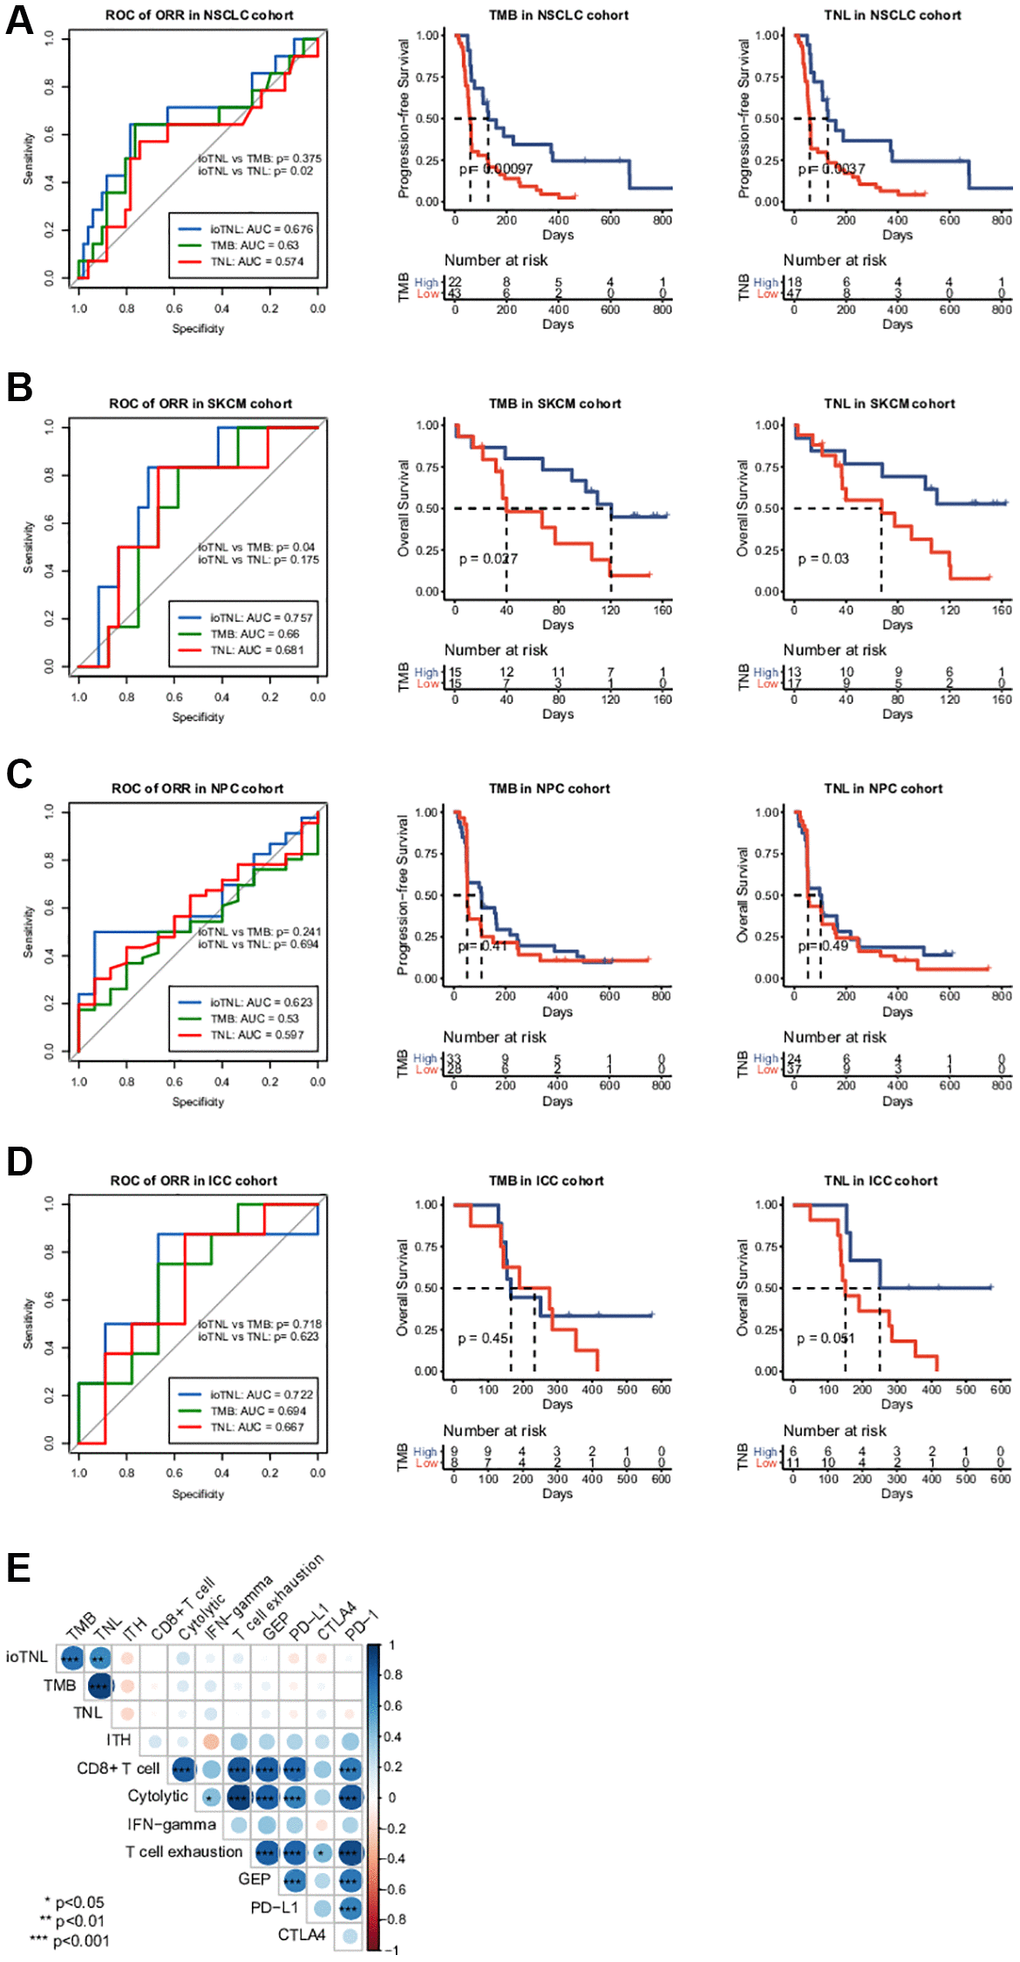 Association between ioTNL score and other immunotherapy biomarkers. Comparison of the response prediction among TMB, TNL and ioTNL in the NSCLC cohort (A, left), the SKCM cohort (B, left), the NPC cohort (C, left) and the ICC cohort (D, left). Kaplan-Meier analysis of patient survival of TMB and TNL in the NSCLC cohort (A, middle and right), the SKCM cohort (B, middle and right), the NPC cohort (C, middle and right) and the ICC cohort (D, middle and right). (E) Spearman correlation of ioTNL with genomic biomarkers and microenvironment-related biomarkers in SKCM cohort. Positive correlations are labeled in blue and negative correlation are labeled in red. Size of circle represented the value of correlation.